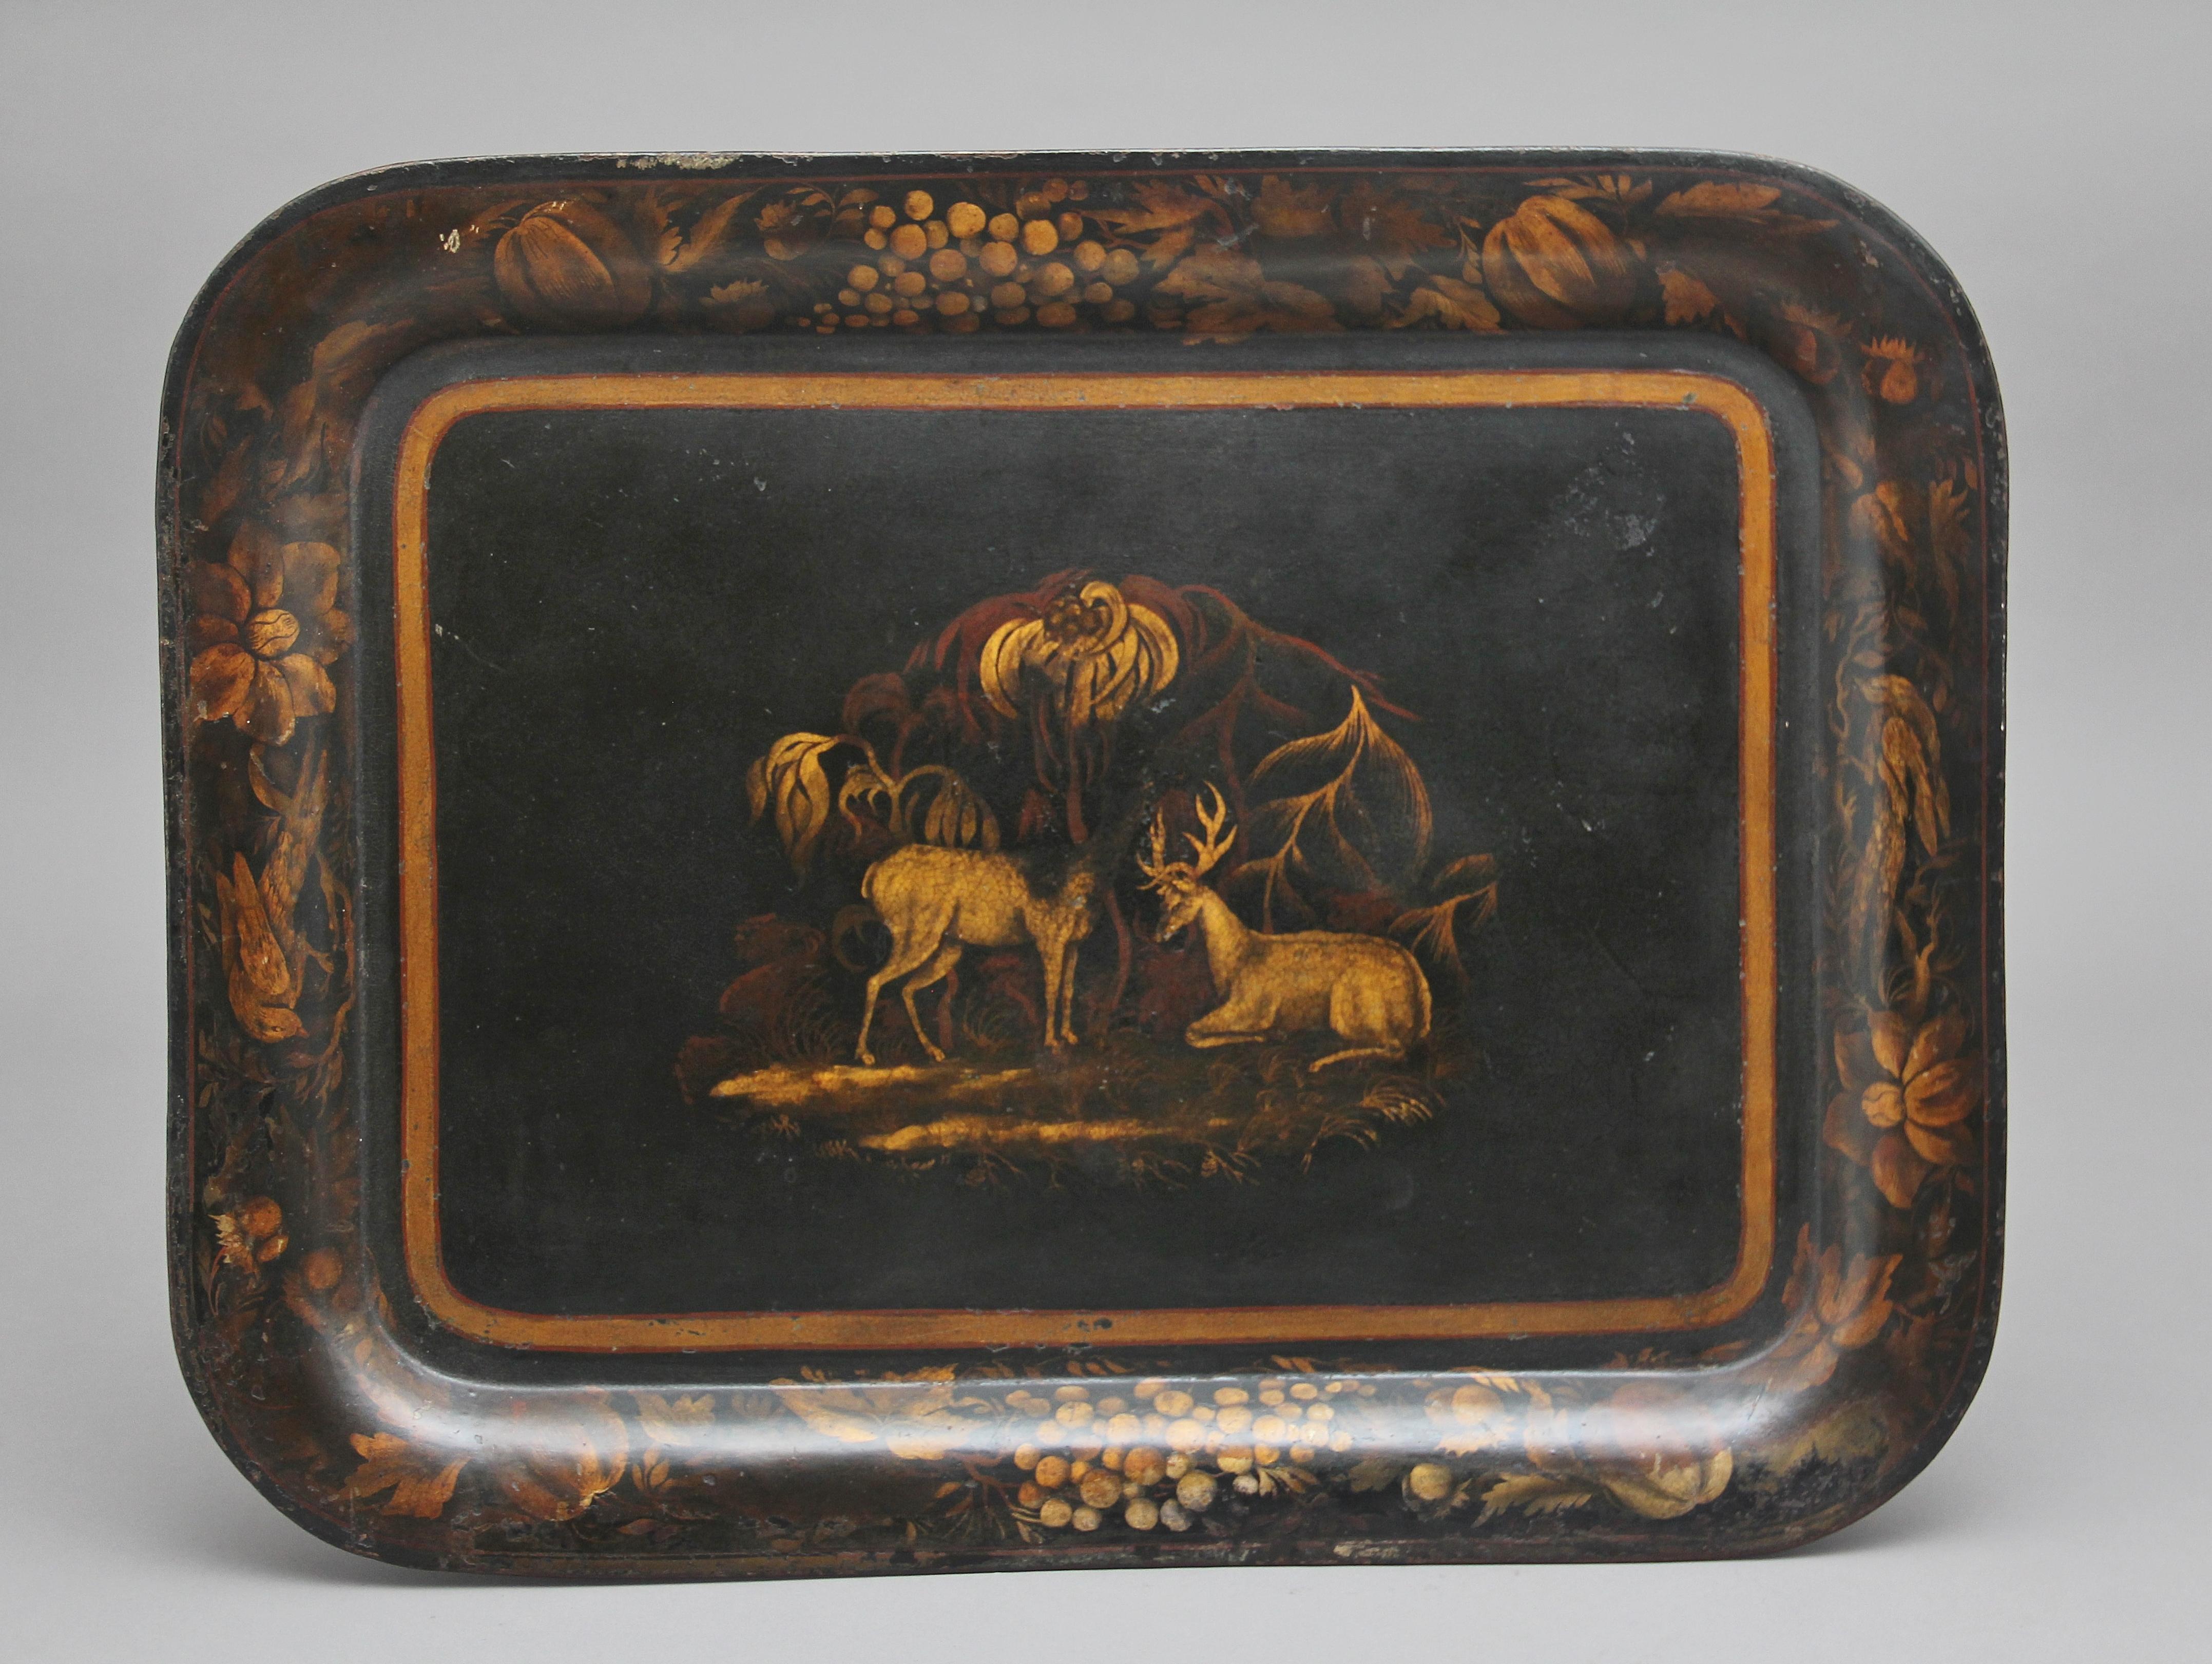 Early 19th century toleware tray on later stand, the rounded rectangular serving tray decorated in tones of gilt with stags, within a border of fruiting vine, supported on a mock bamboo base with a cross stretcher, circa 1830.